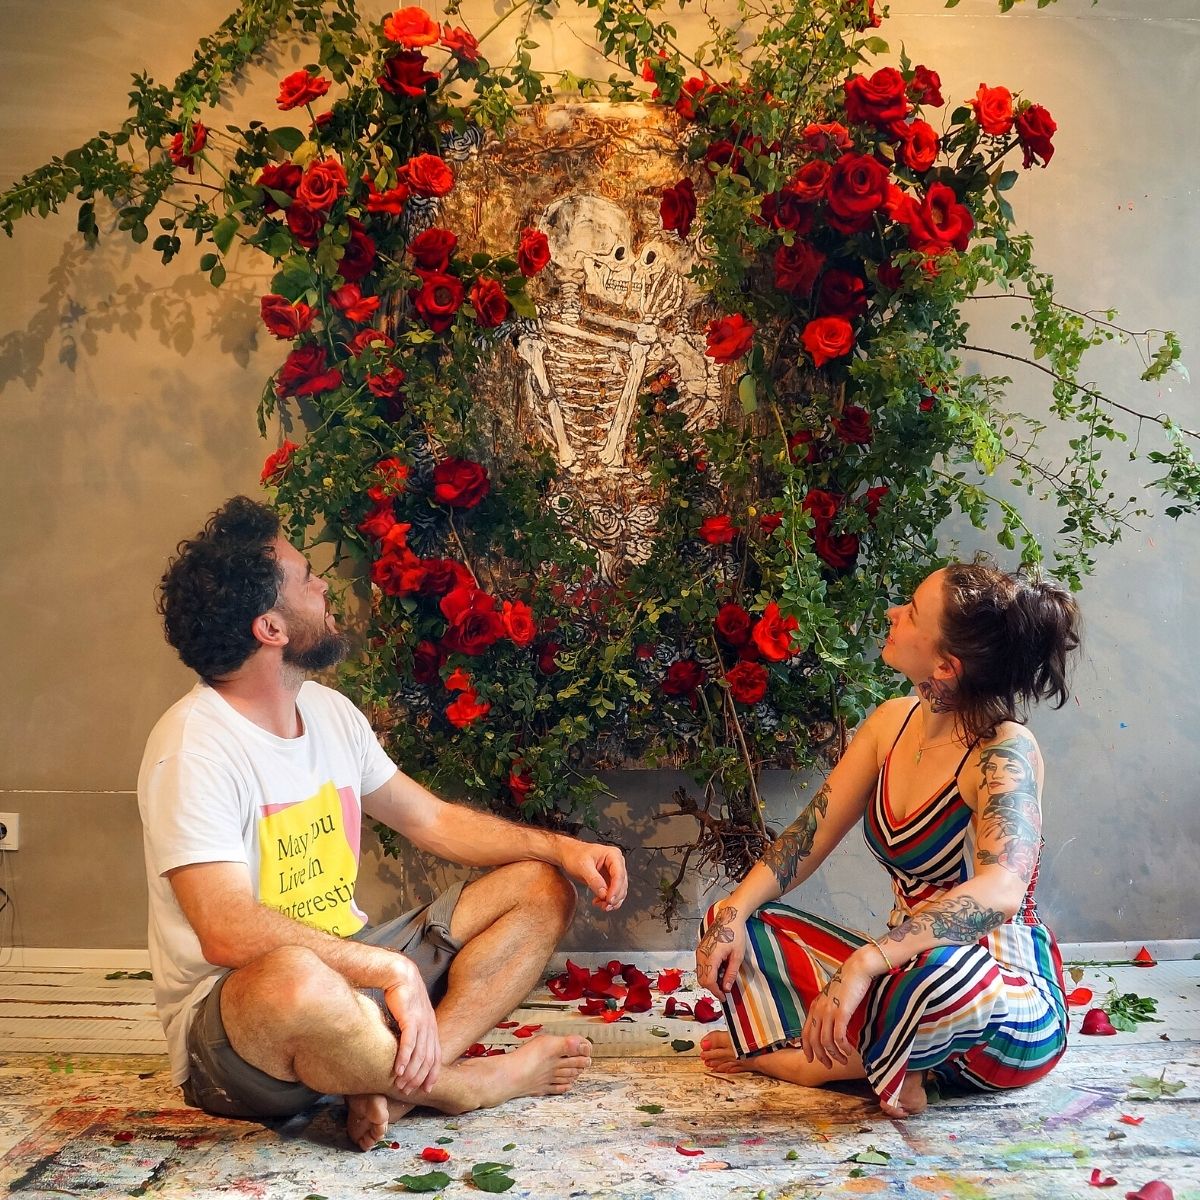 kowalski-asked-me-to-be-part-of-his-art-to-show-love-in-its-full-bloom-with-red-roses-featured